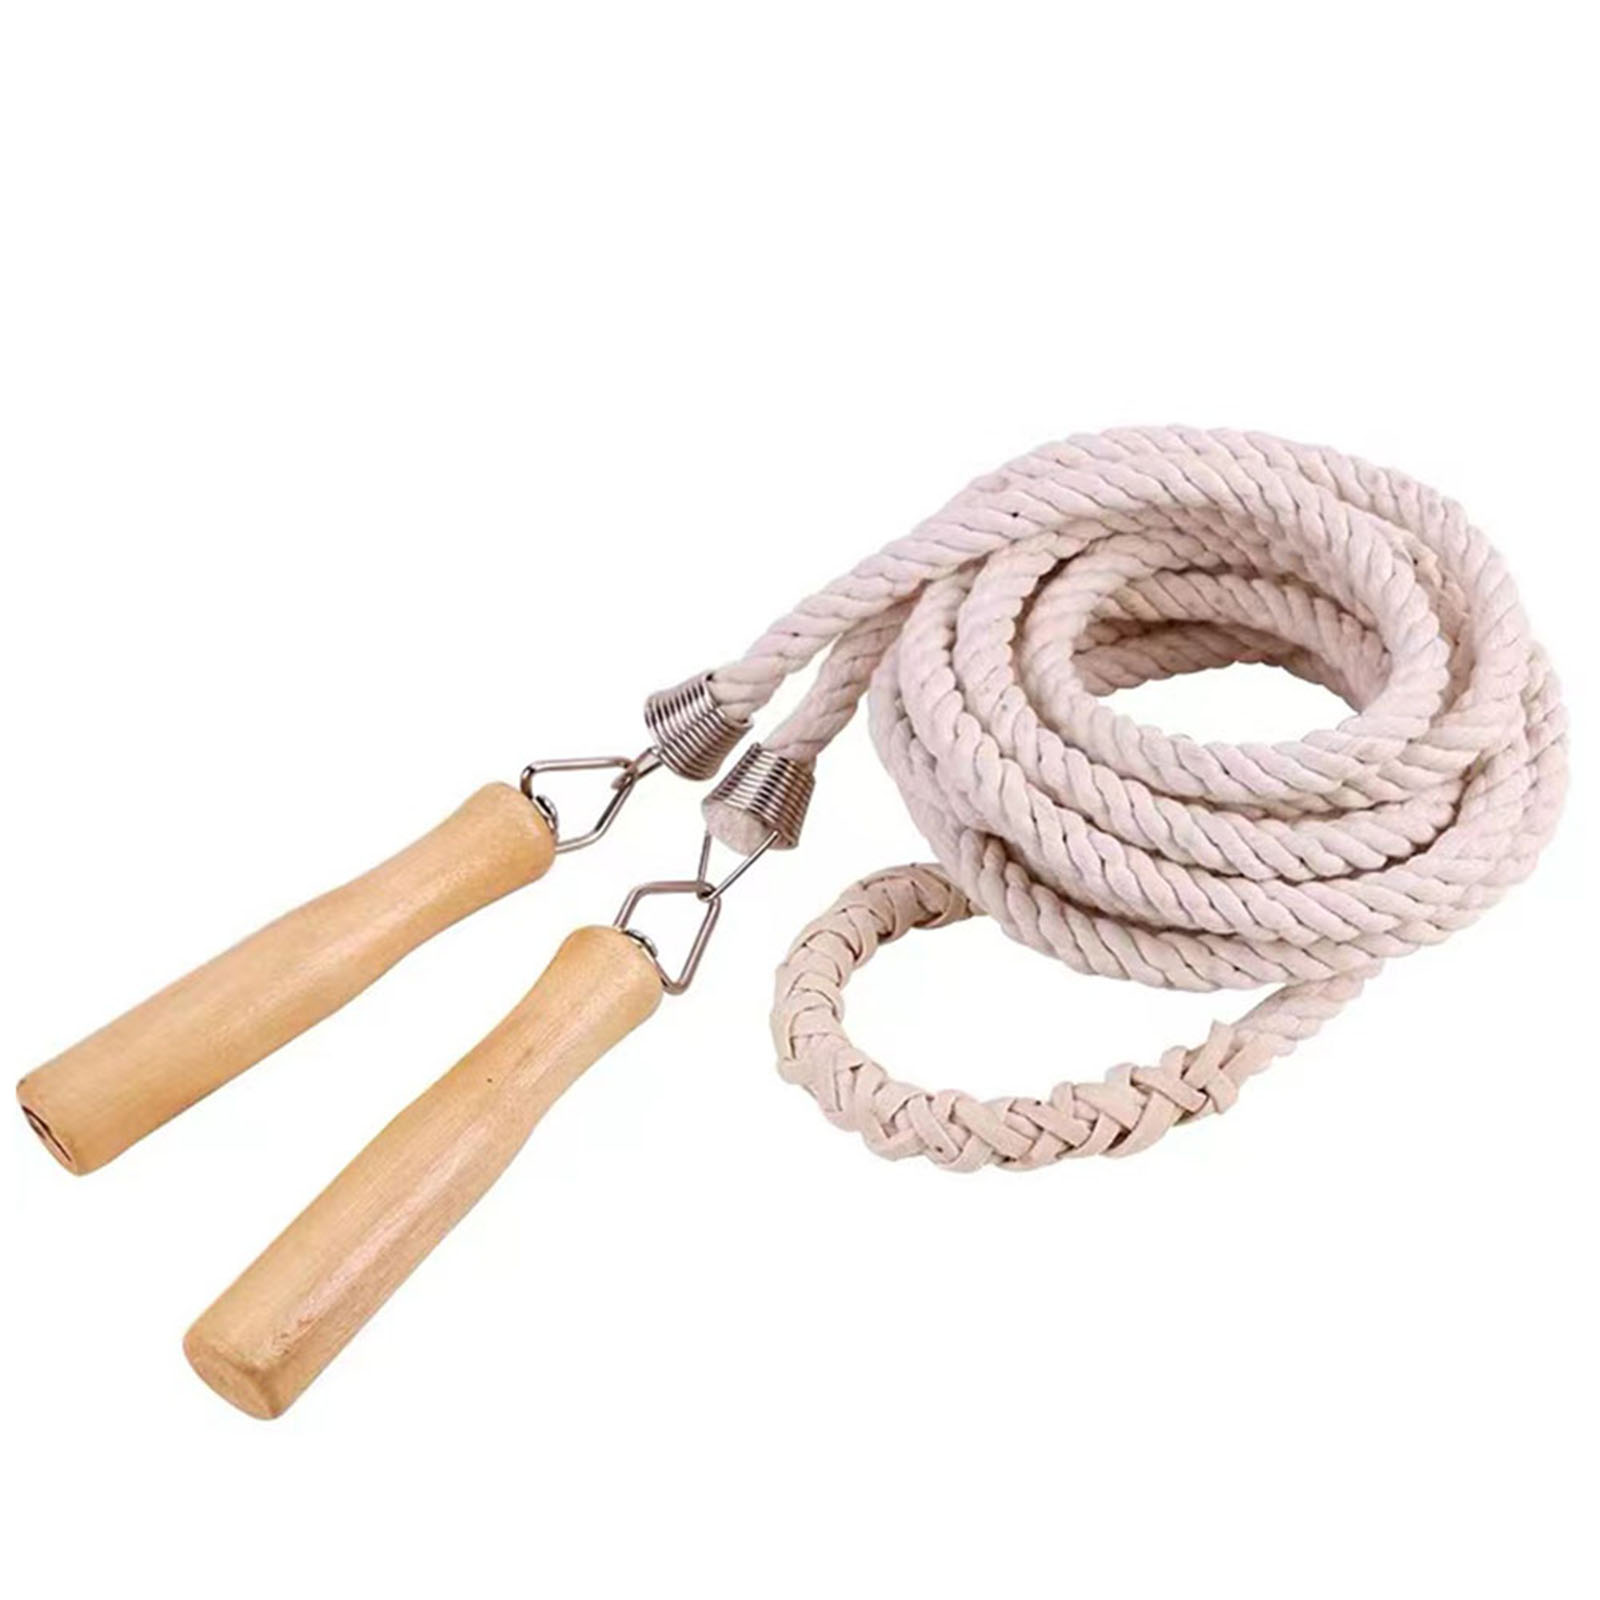 3pcs Skipping Rope With Wooden Handle Outdoor Activity Dutch Jump Rope For Kids Teenagers Grown-ups 16” & 22.9” & 32.8”